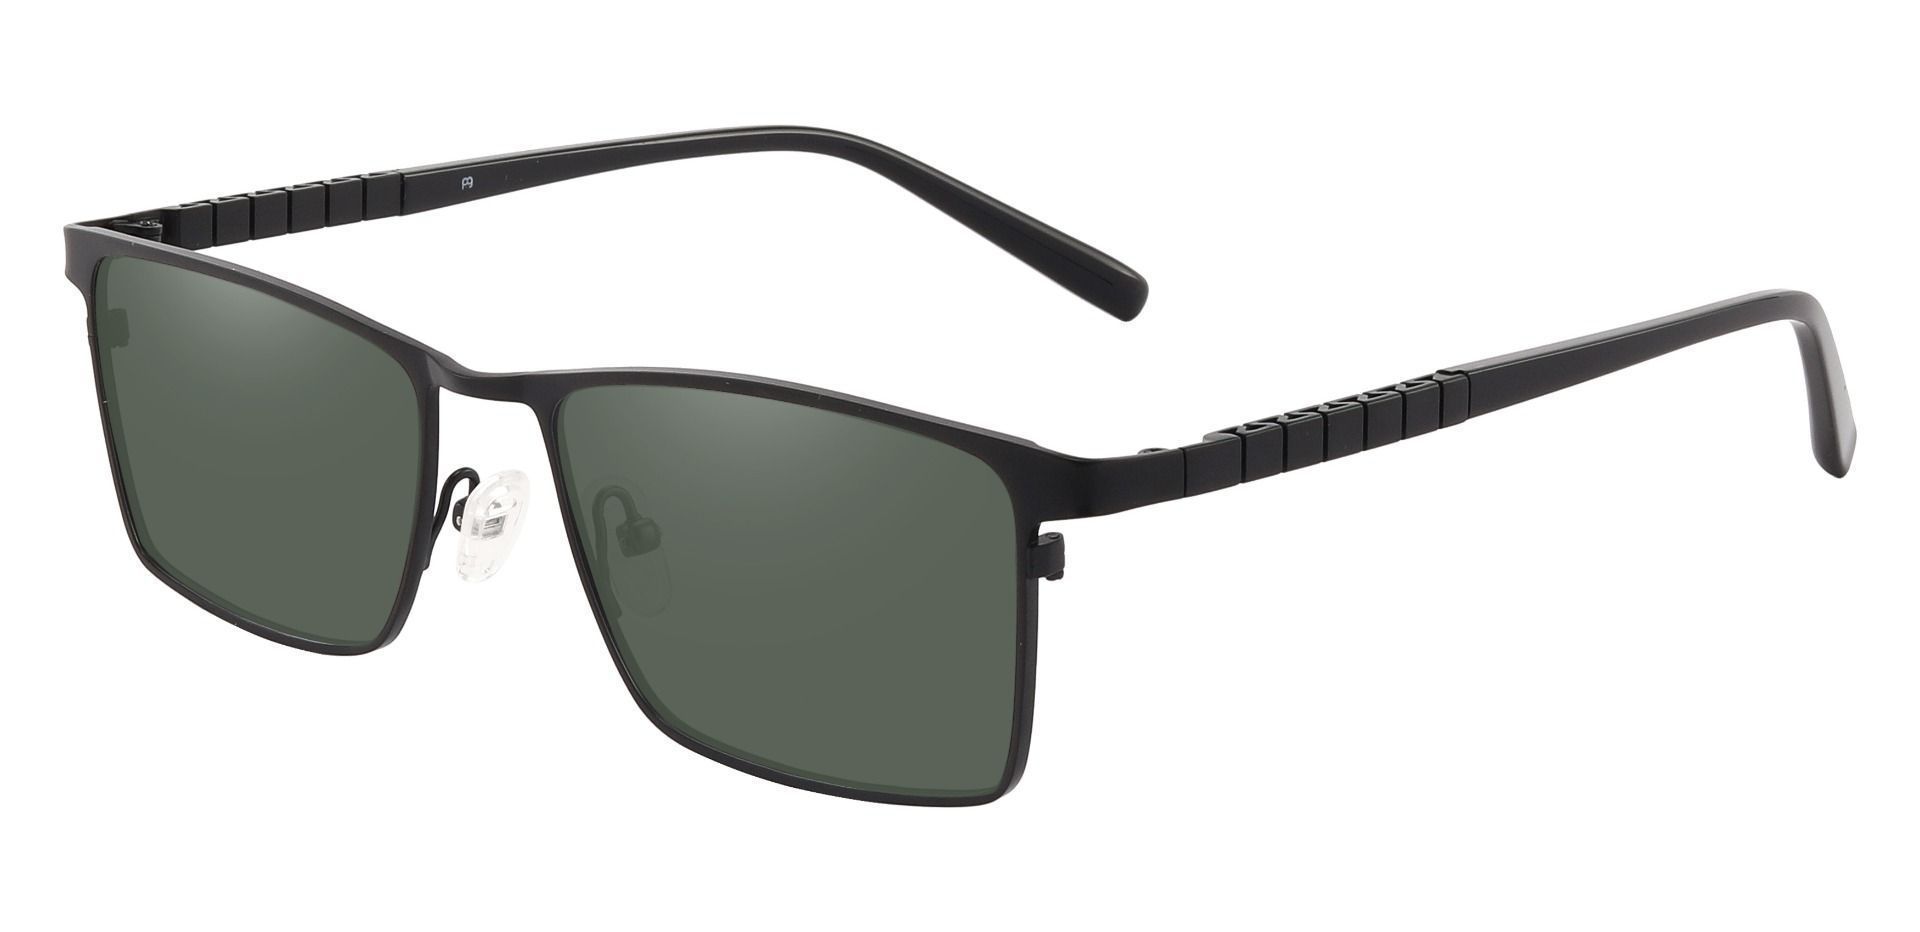 Cheshire Rectangle Non-Rx Sunglasses - Black Frame With Green Lenses